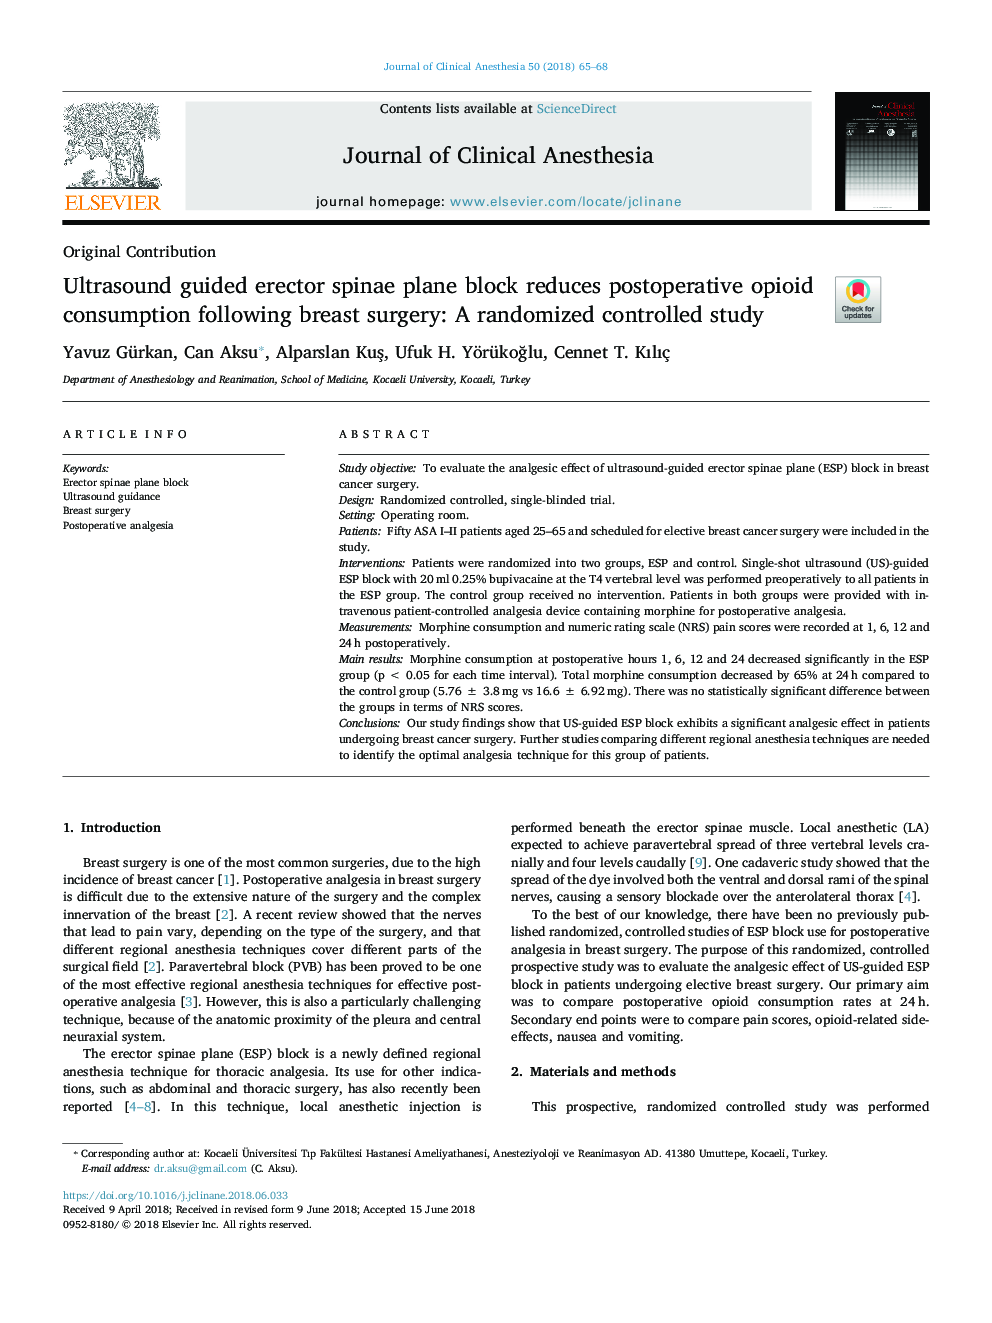 Ultrasound guided erector spinae plane block reduces postoperative opioid consumption following breast surgery: A randomized controlled study